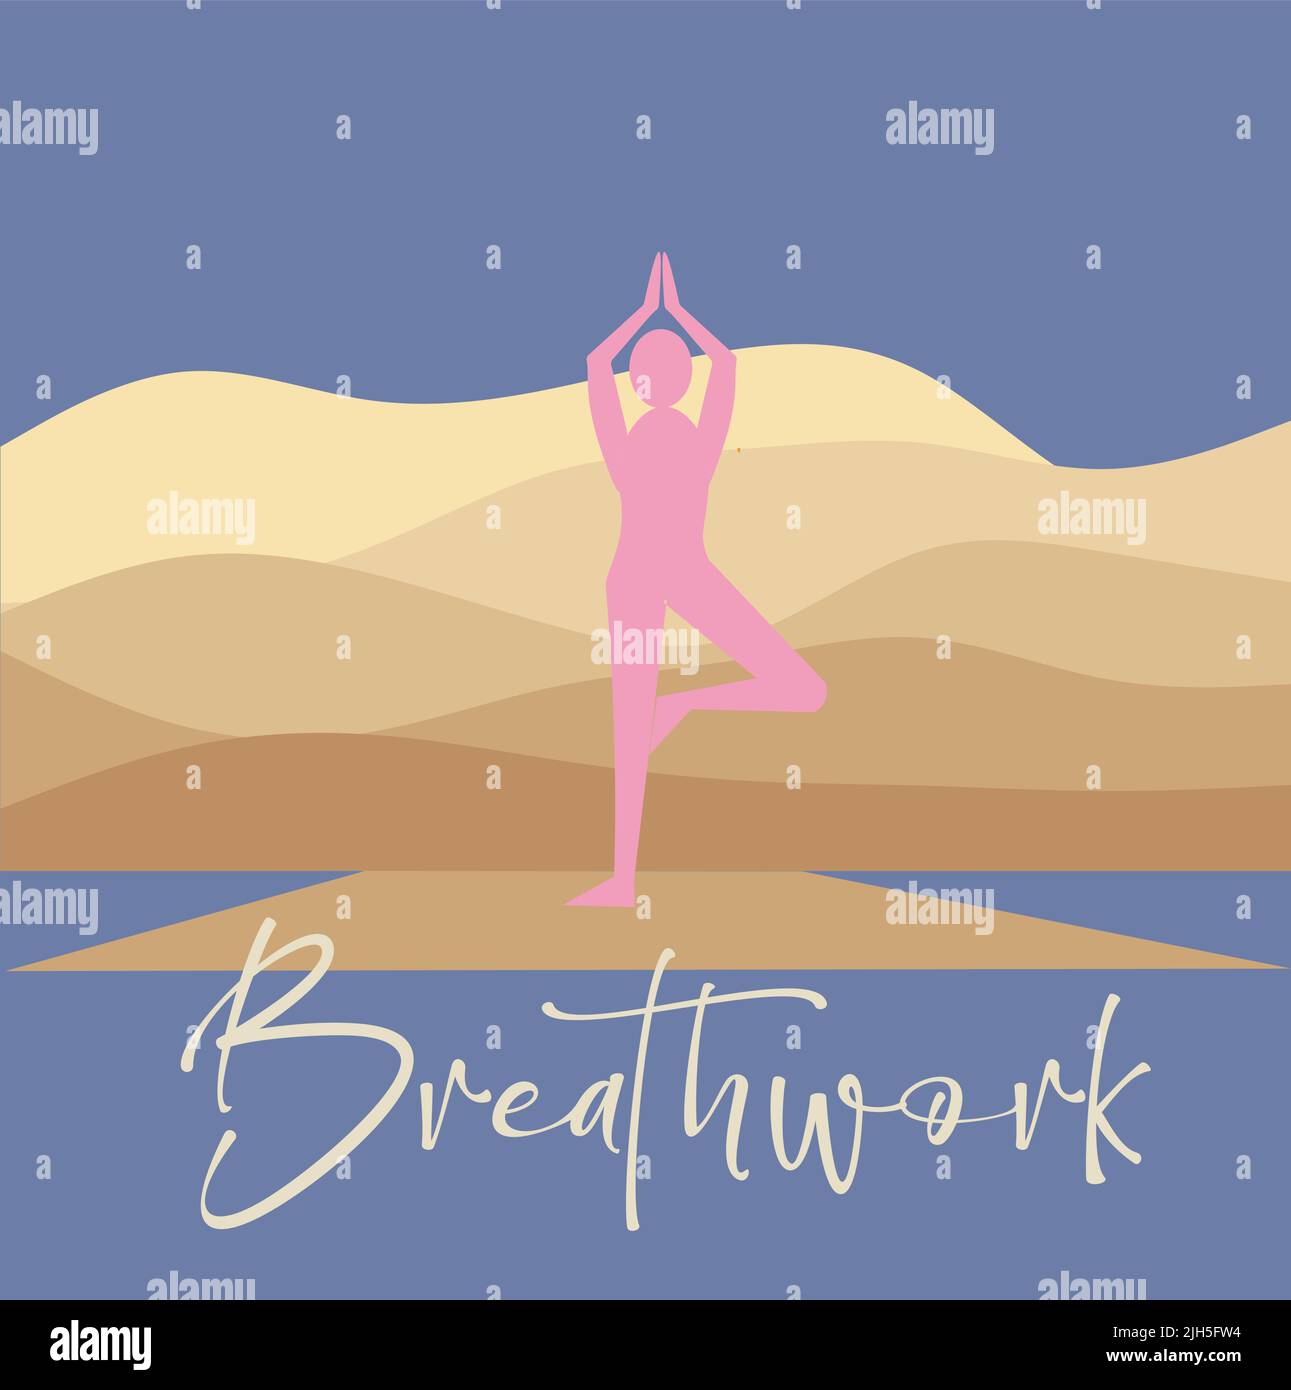 Breathwork Concept vector Illustration on a tranquil background. Stock Vector